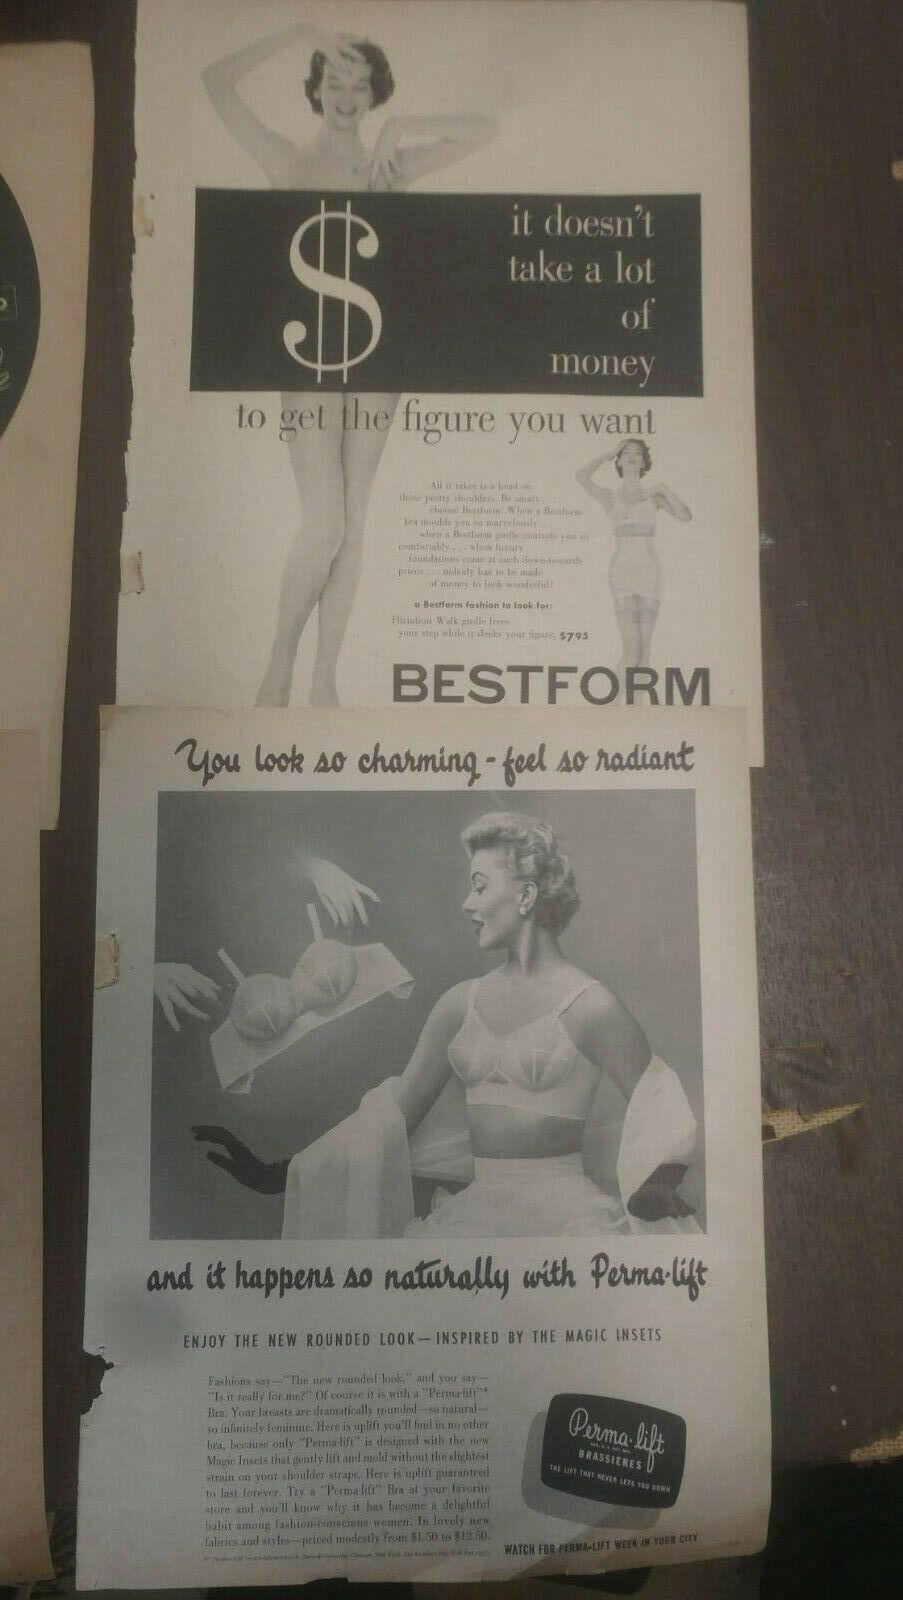 1940s-50s lot of 4 full page lingerie ads